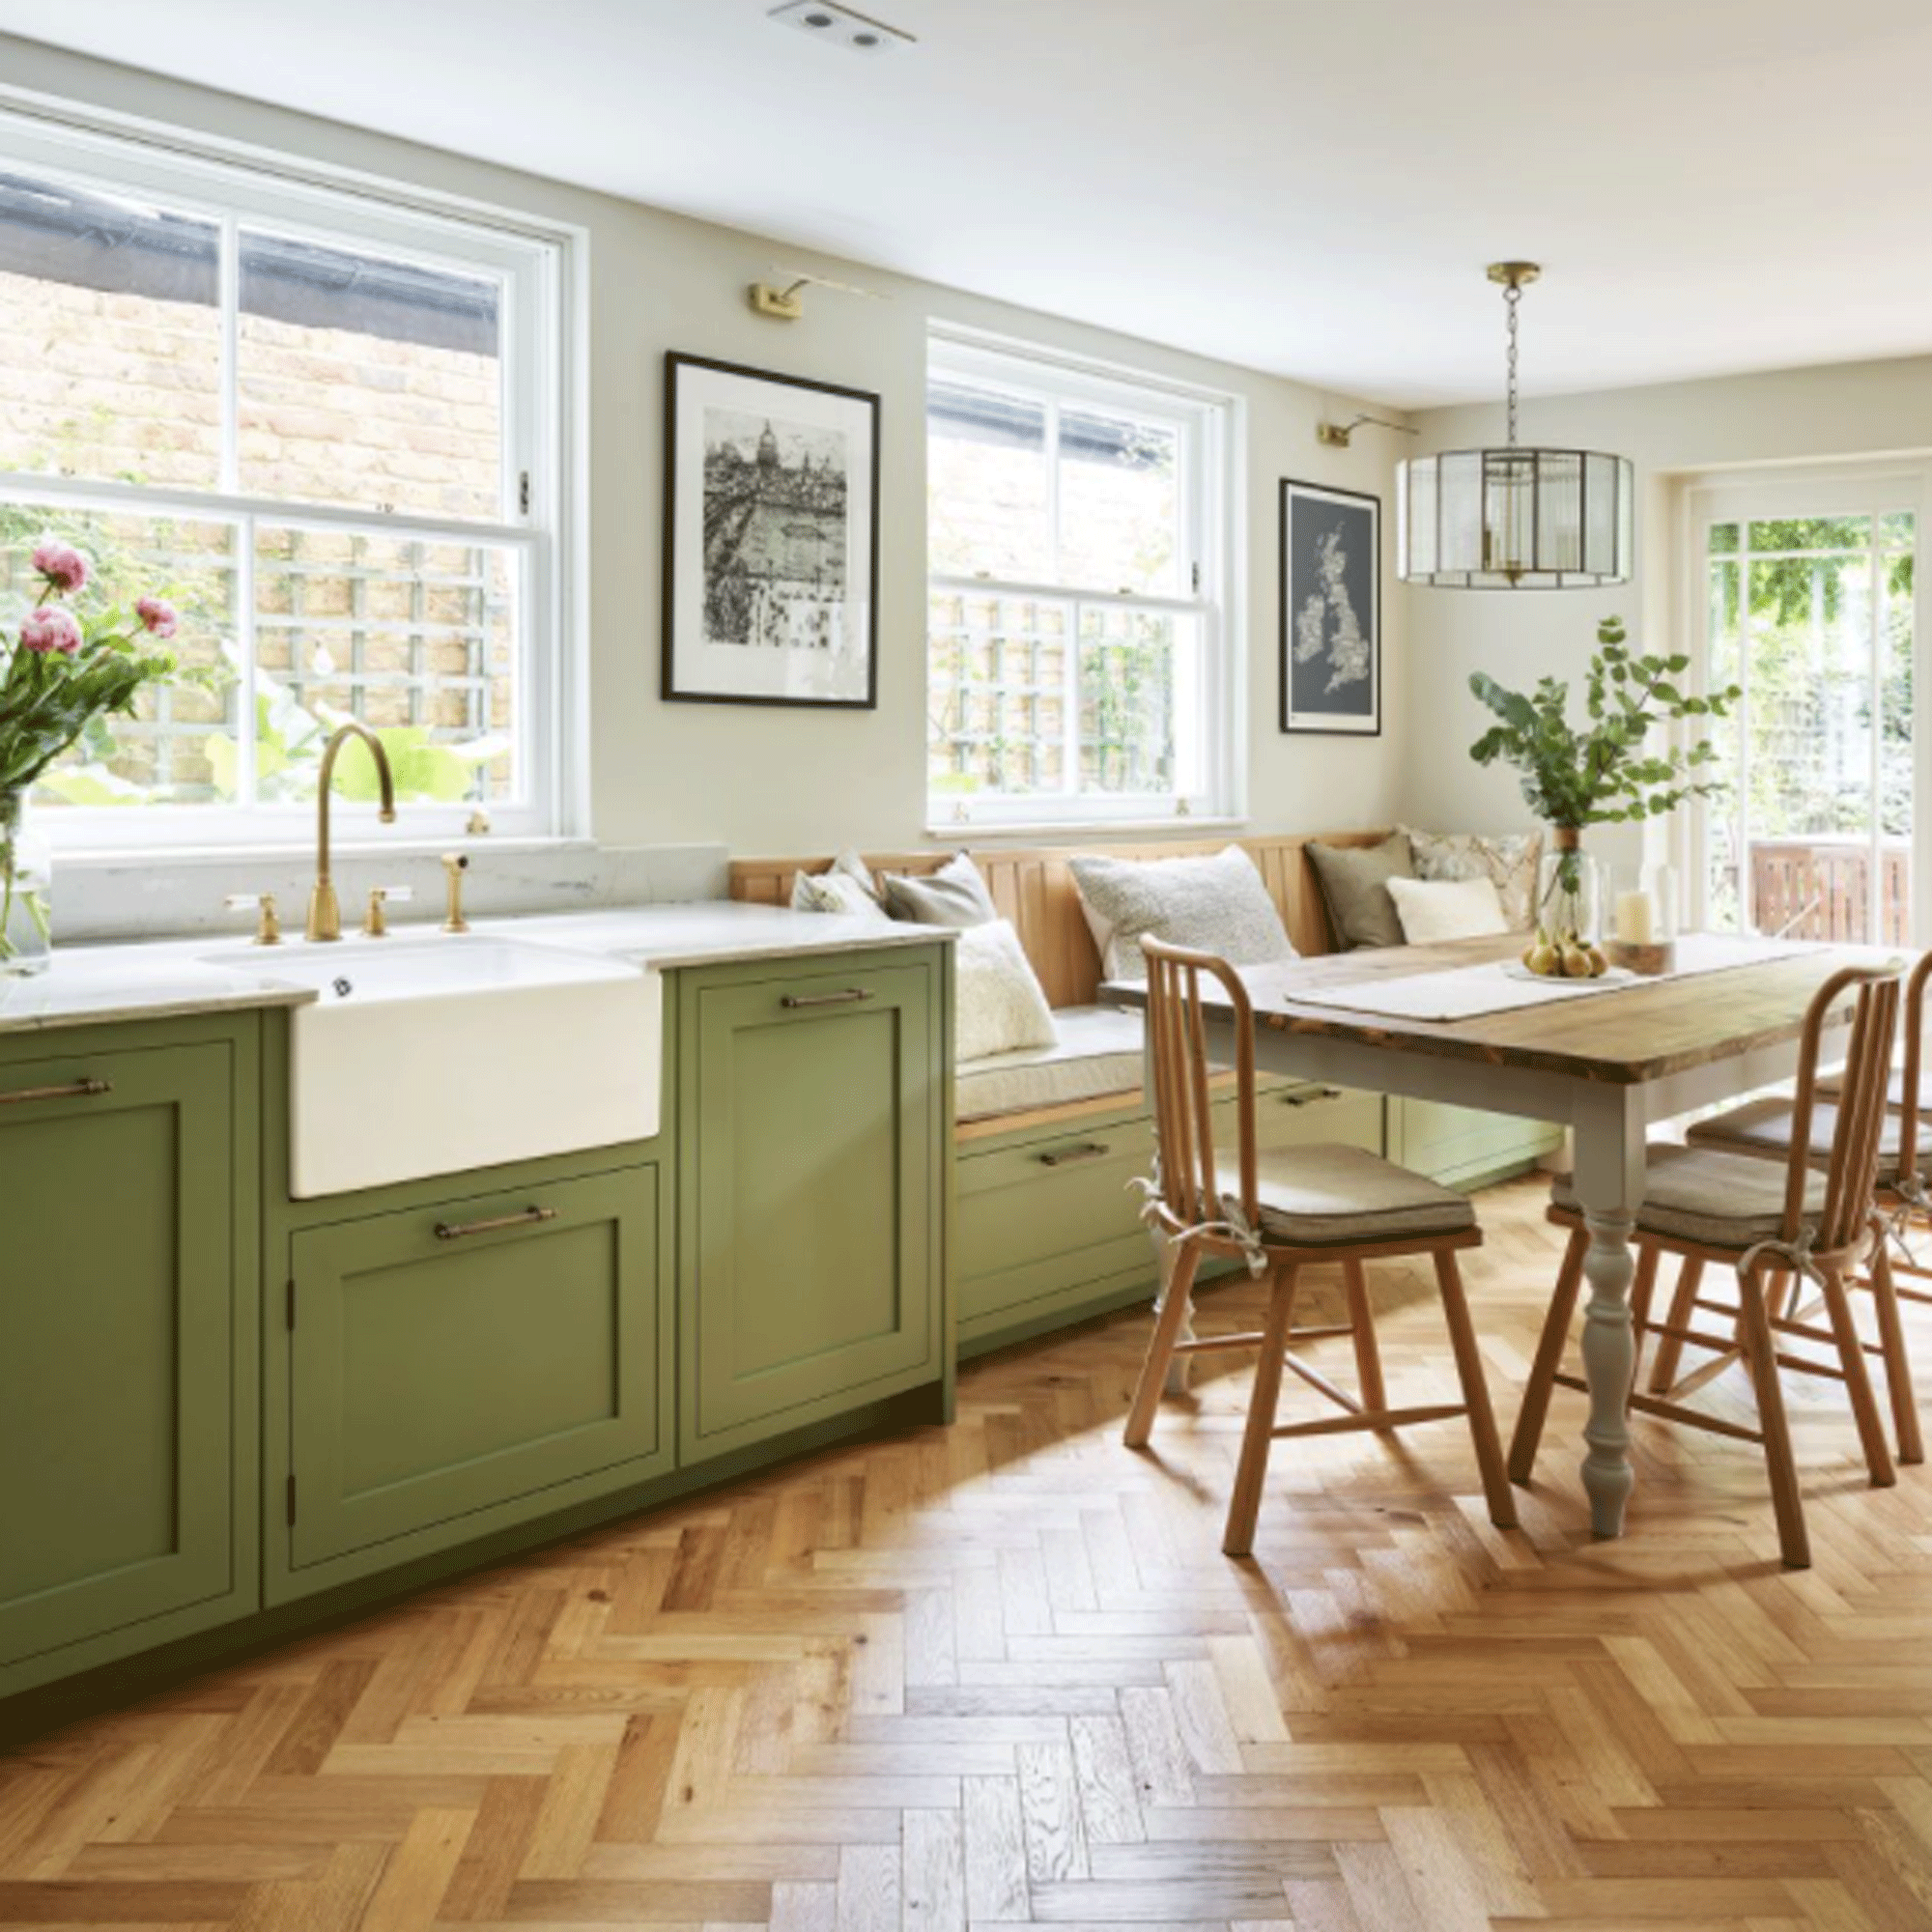 Green kitchen with banquette seating